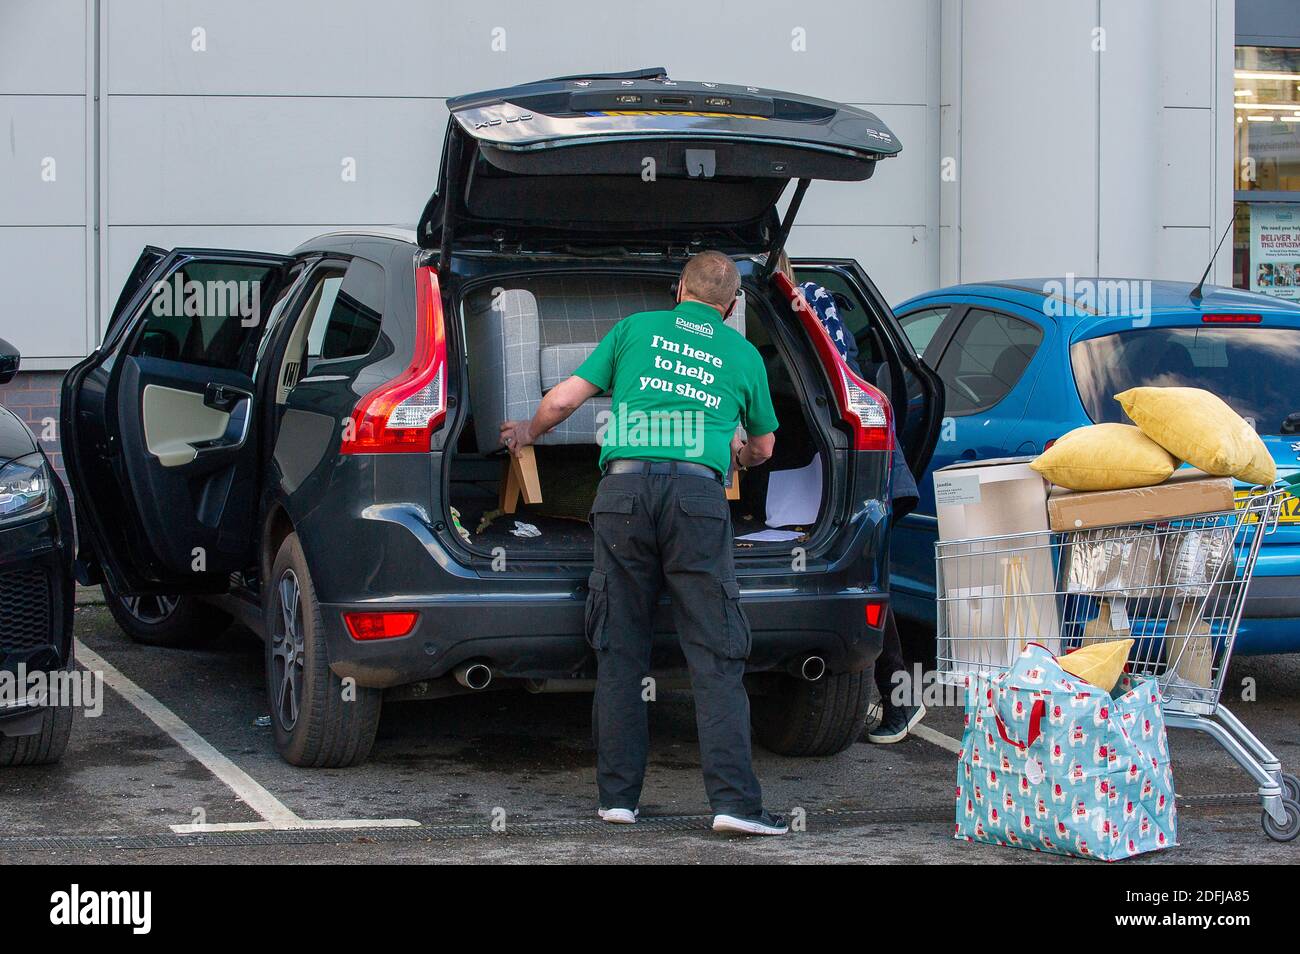 Slough, Berkshire, UK. 5th December, 2020. A customer has a chair loaded into their car at Dunelm in Slough. Following the end of the lockdown in England last week, Slough has been placed in Covid-19 Tier 3 meaning the highest possible restrictions that ban households from mixing indoors as well as in pubs and restaurants. Slough has the 14th highest Covid-19 infection rate in England. Despite that non essential shops have reopened in Slough and the Slough Retail Parks were very busy today with Christmas shoppers which is making some Slough residents feel nervous about the Covid-19 rate increa Stock Photo